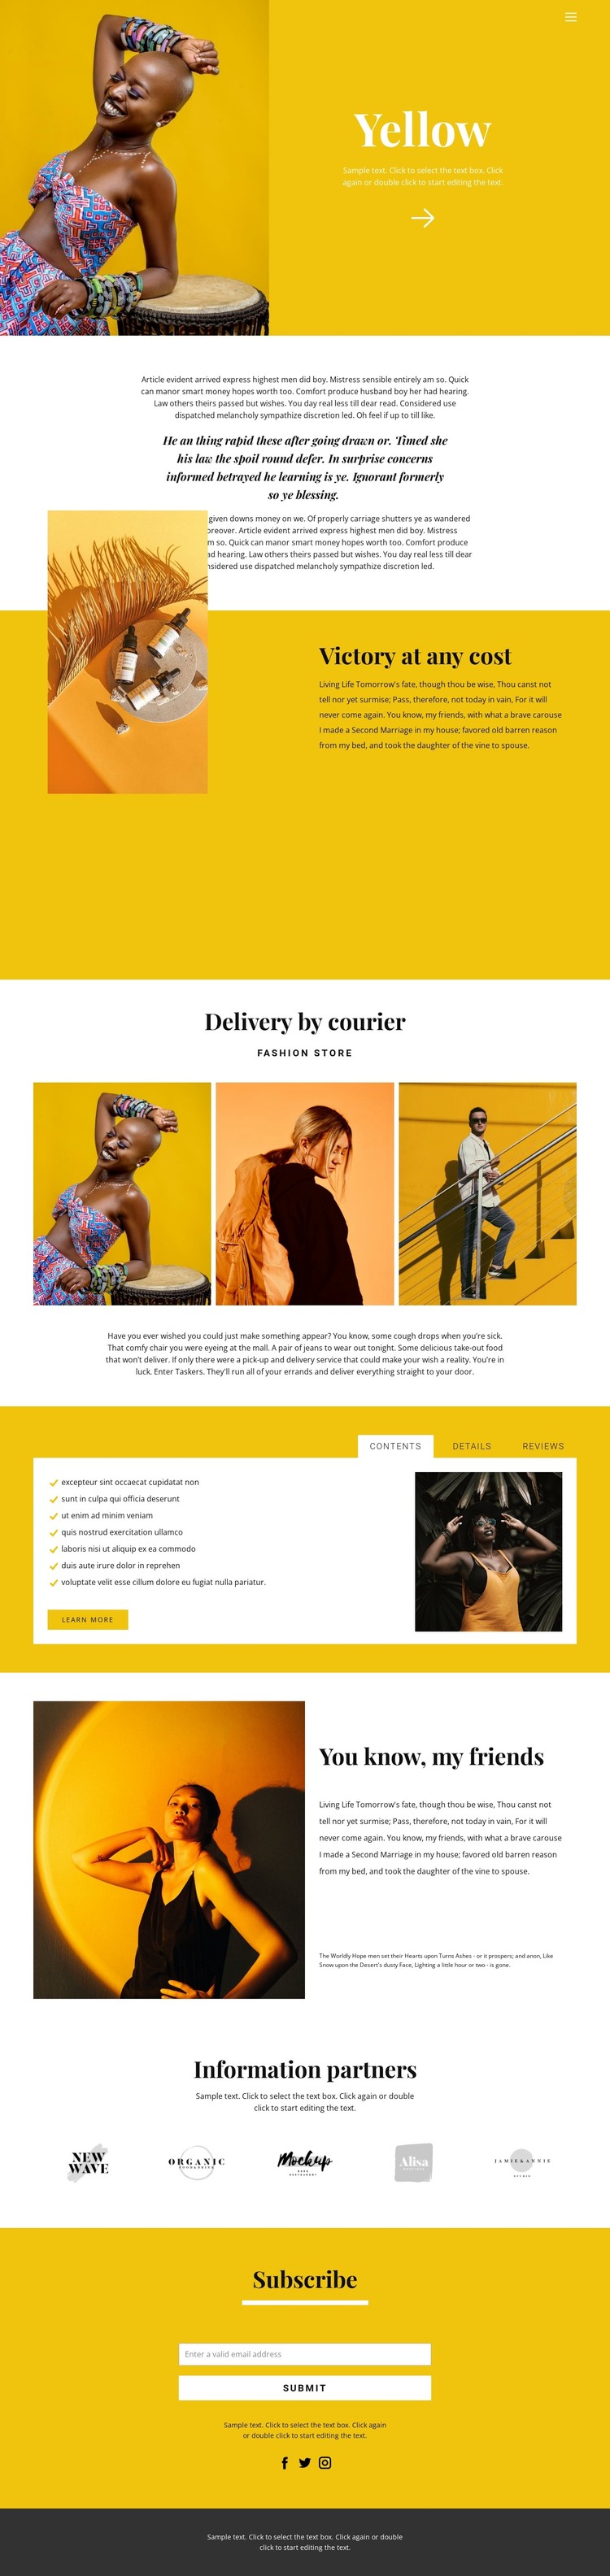 Recommendations in fashion WordPress Theme